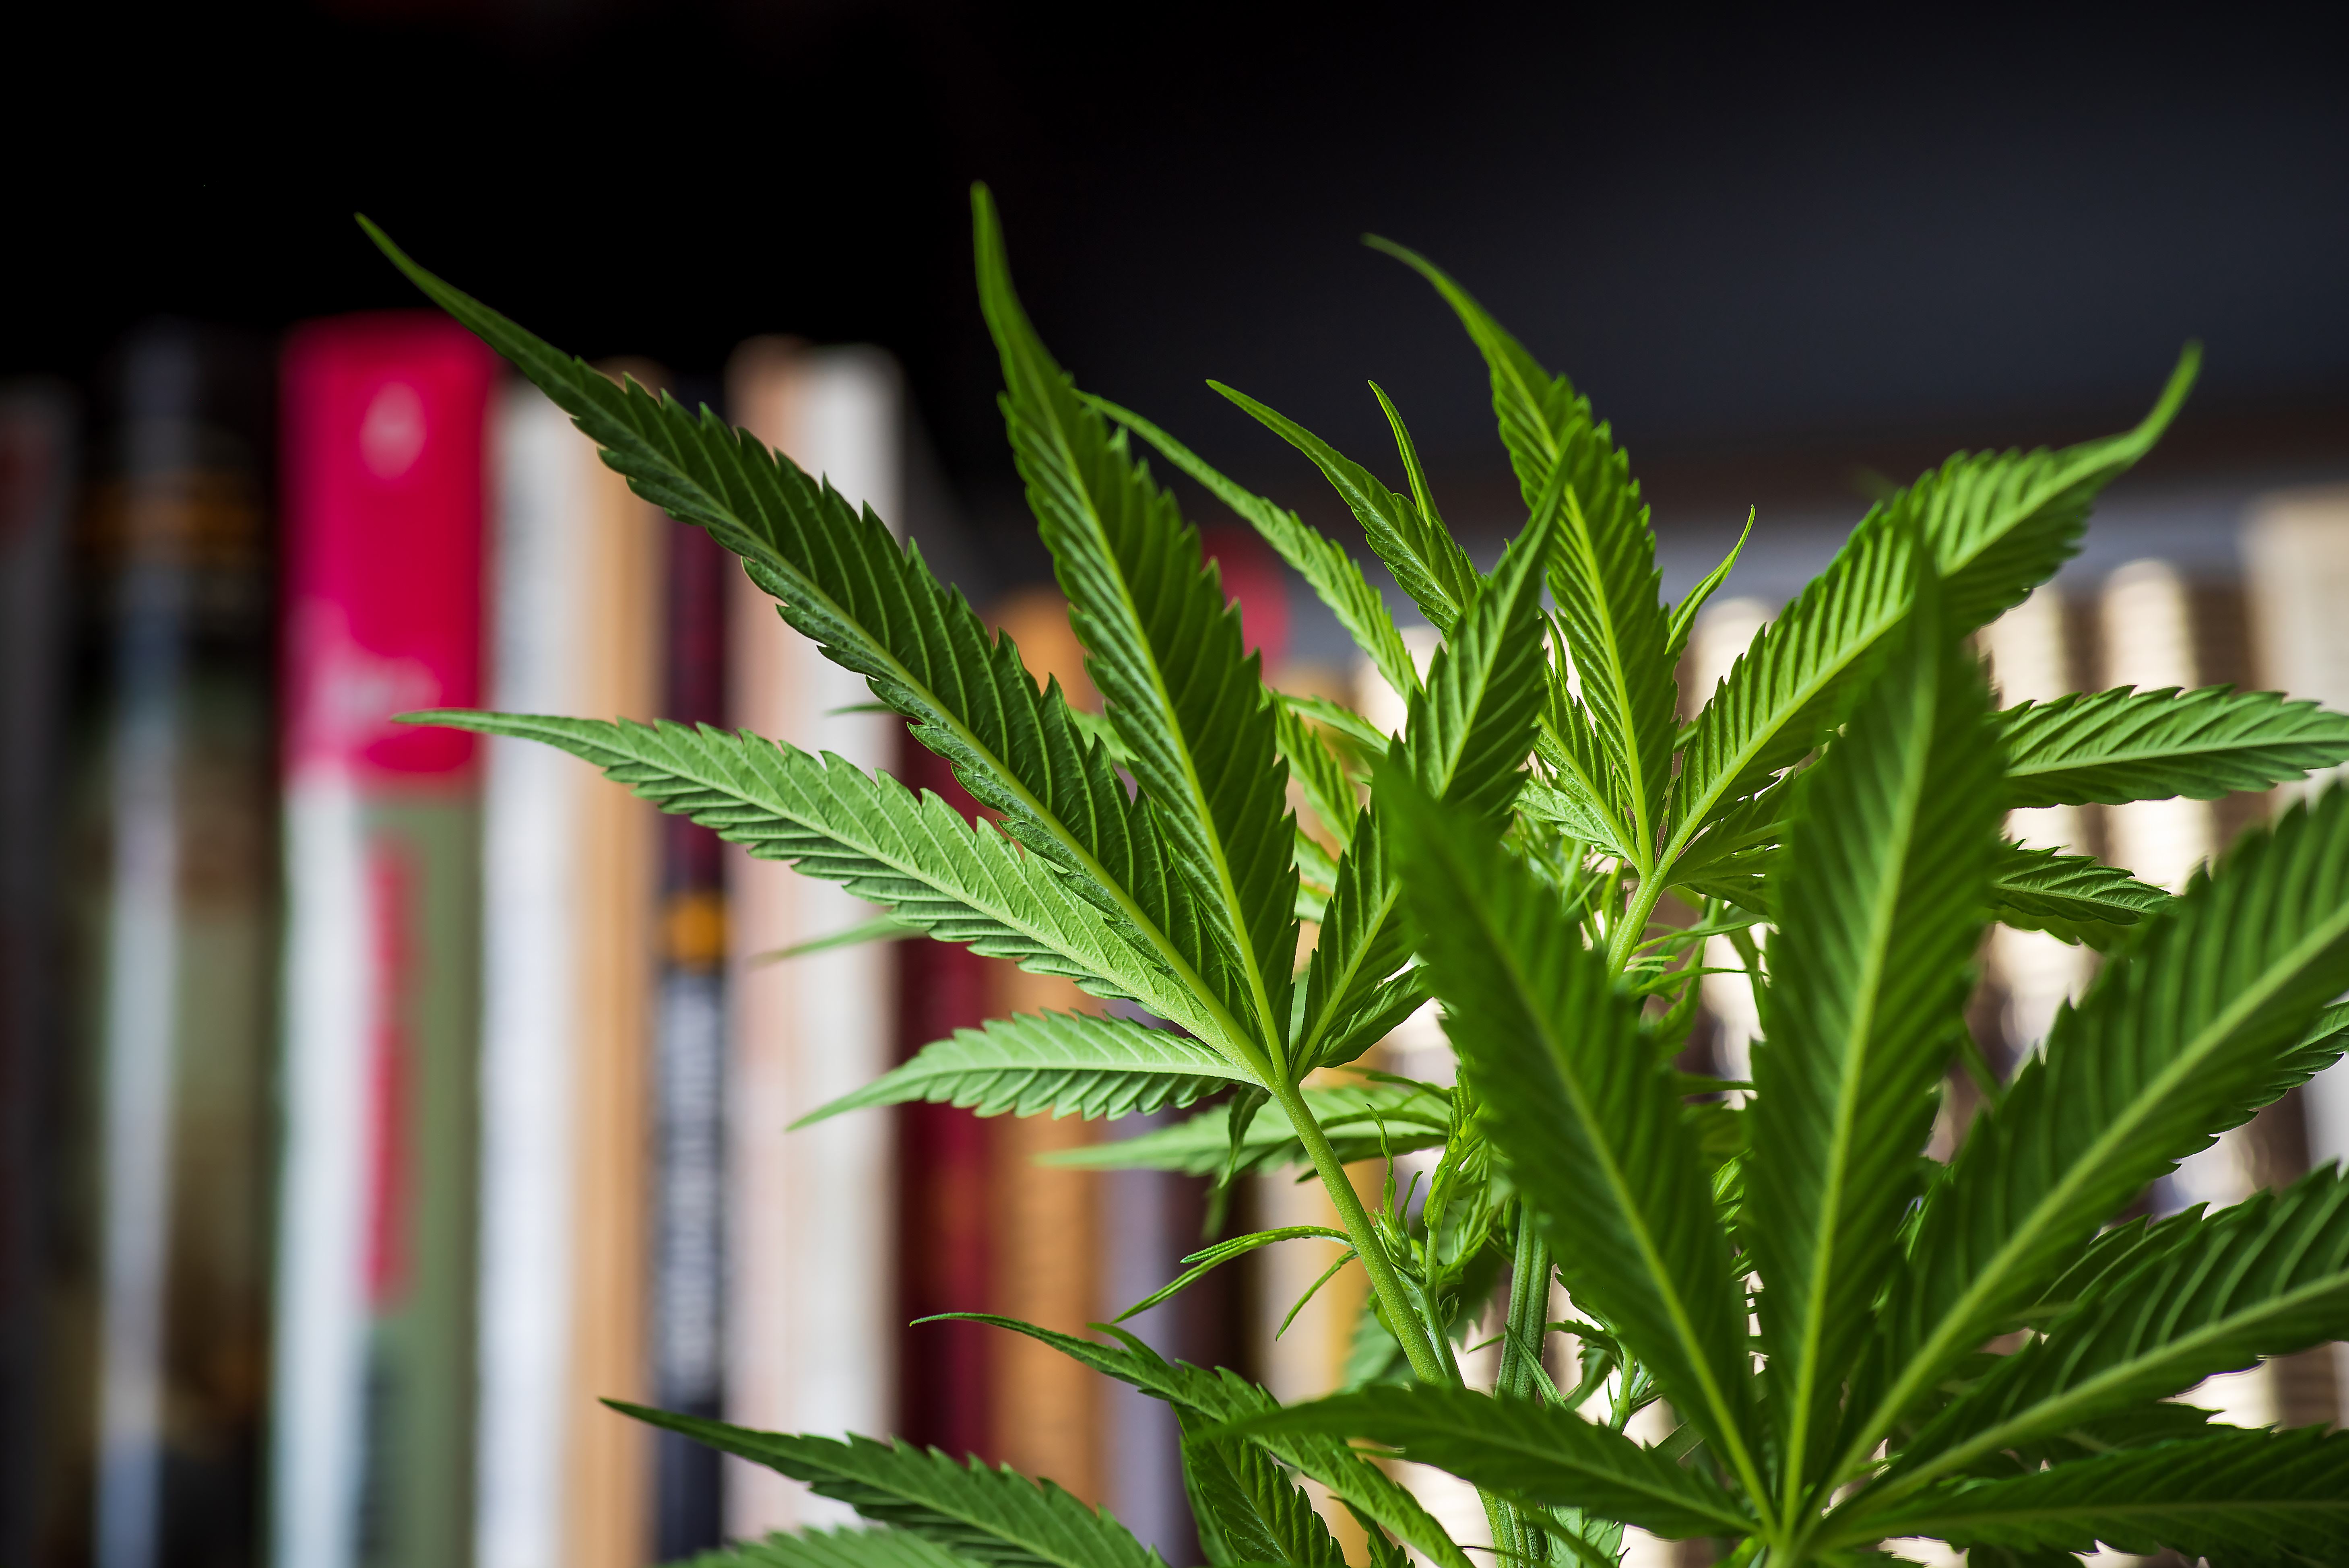 Closeup of green cannabis leaves in foreground with bookshelf with books blurry in background.